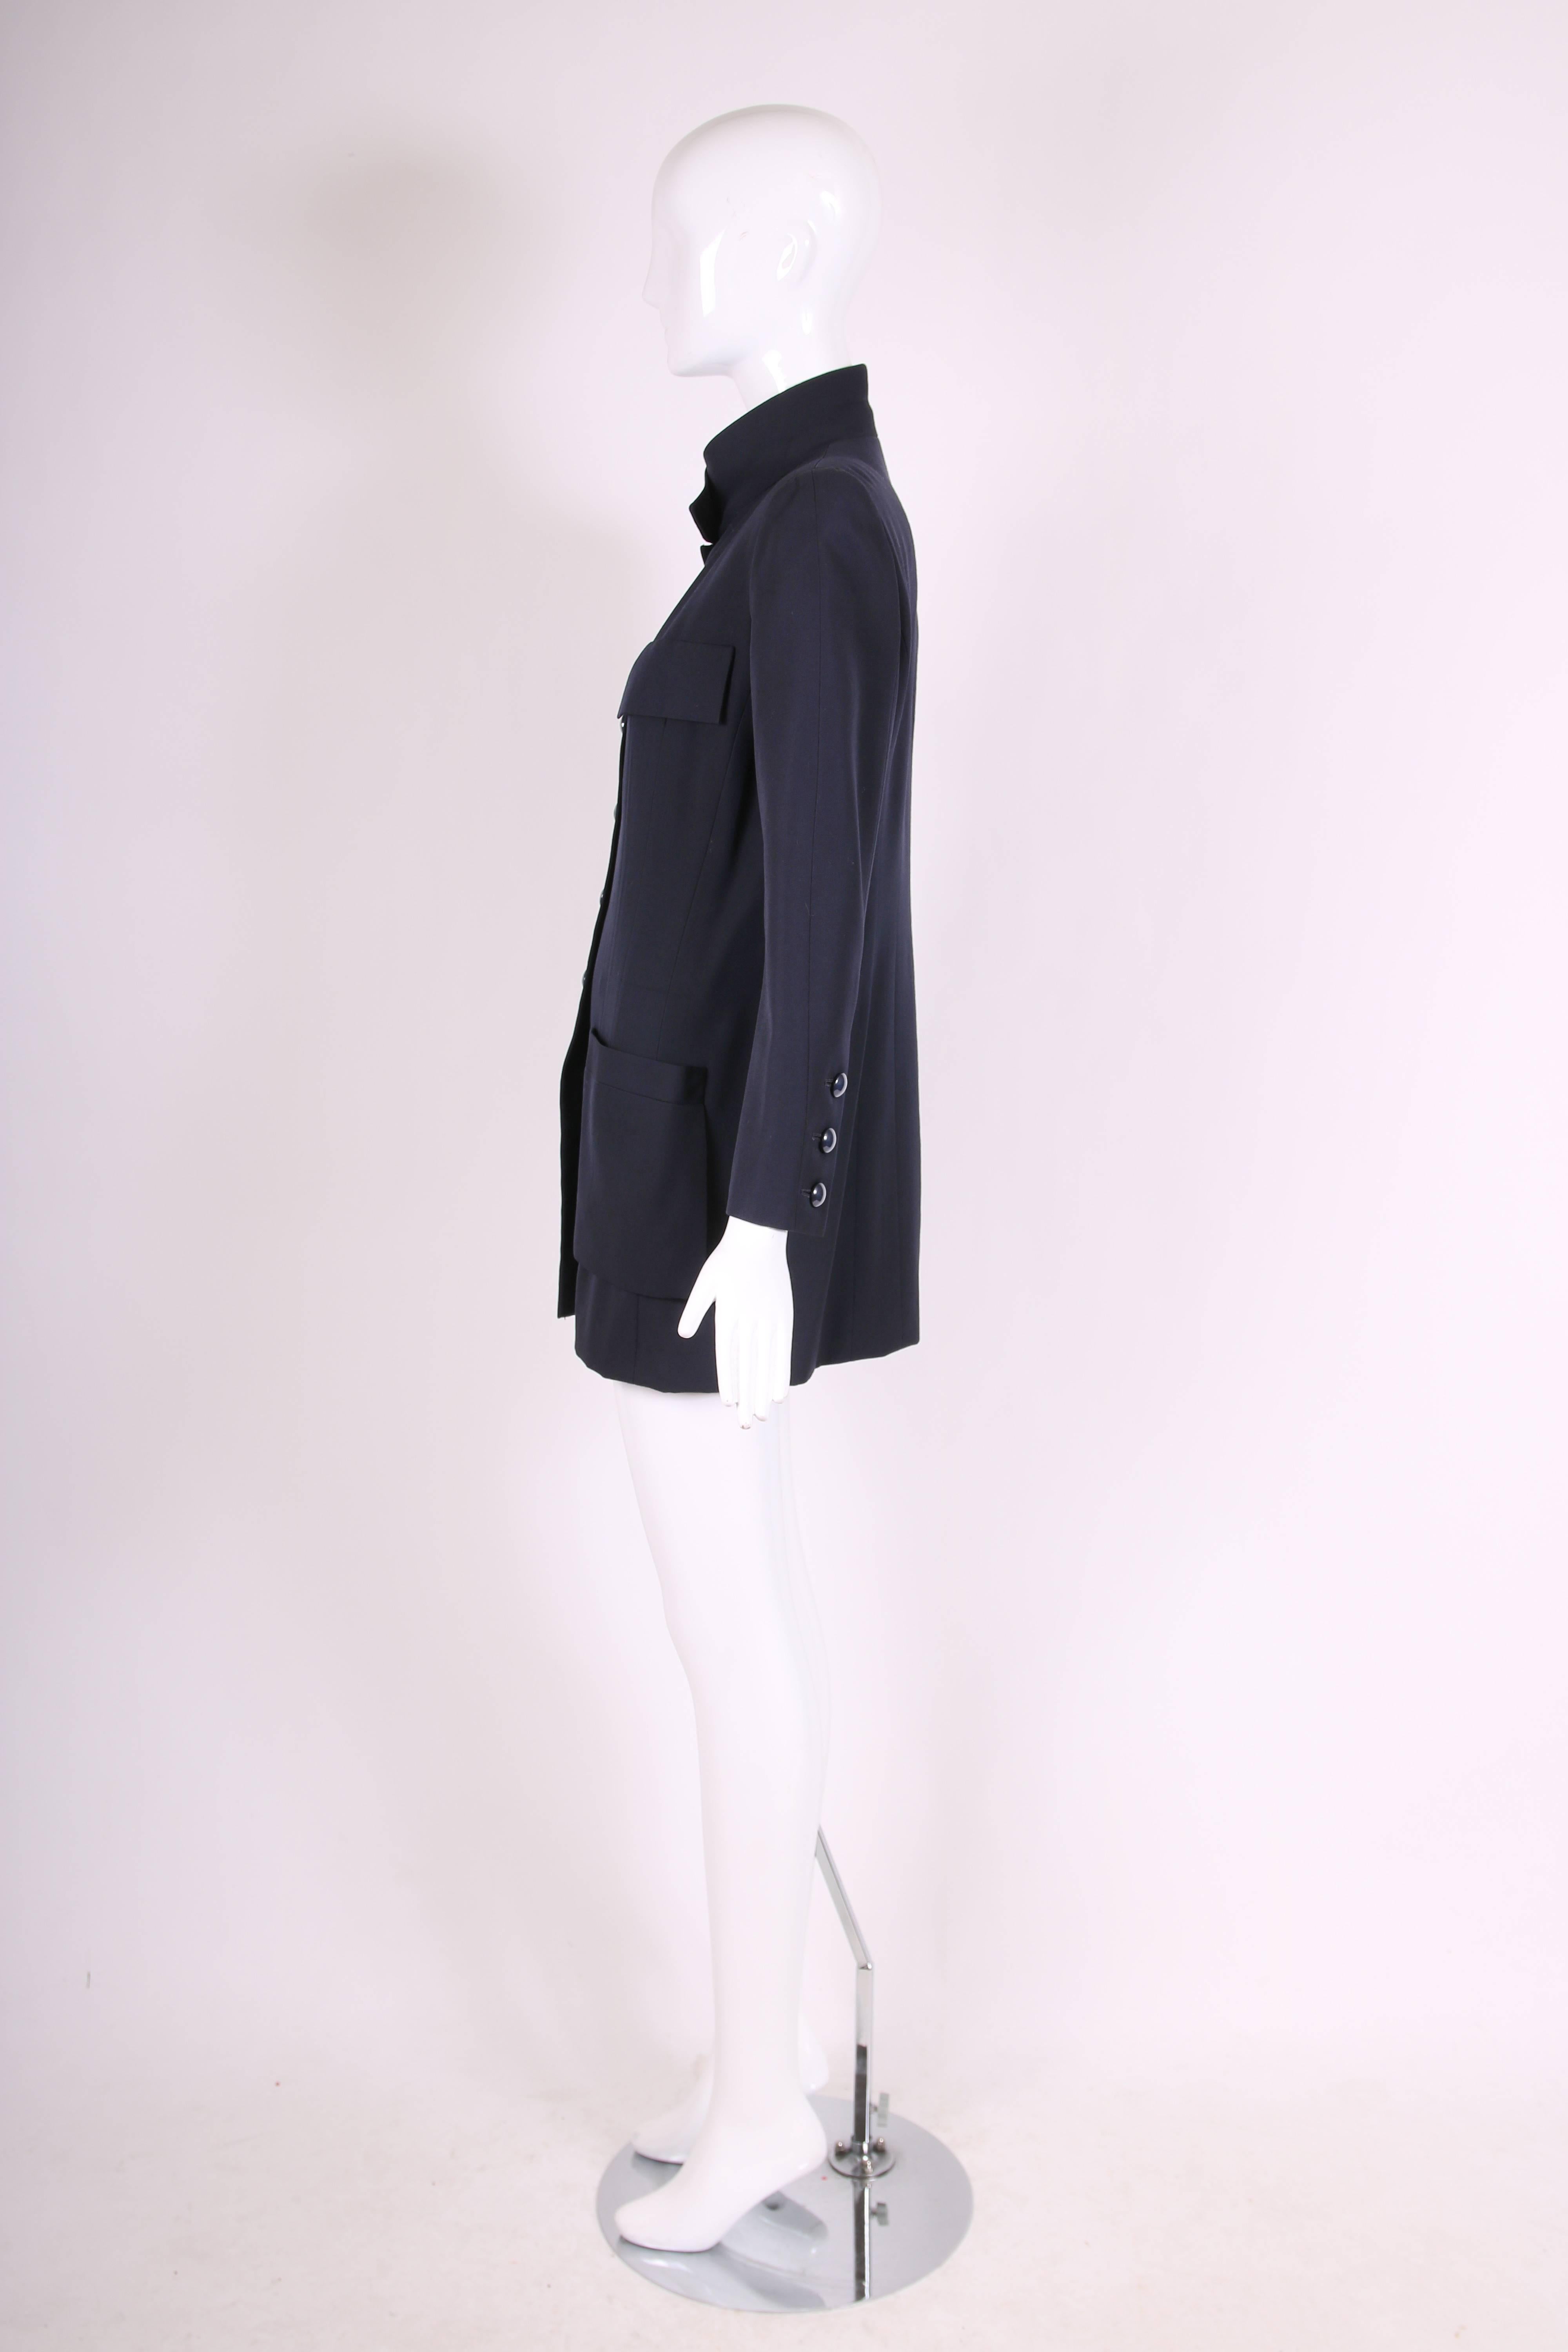 Women's Chanel Haute Couture Navy Blue Wool Jacket and Skirt Ensemble No. 68181